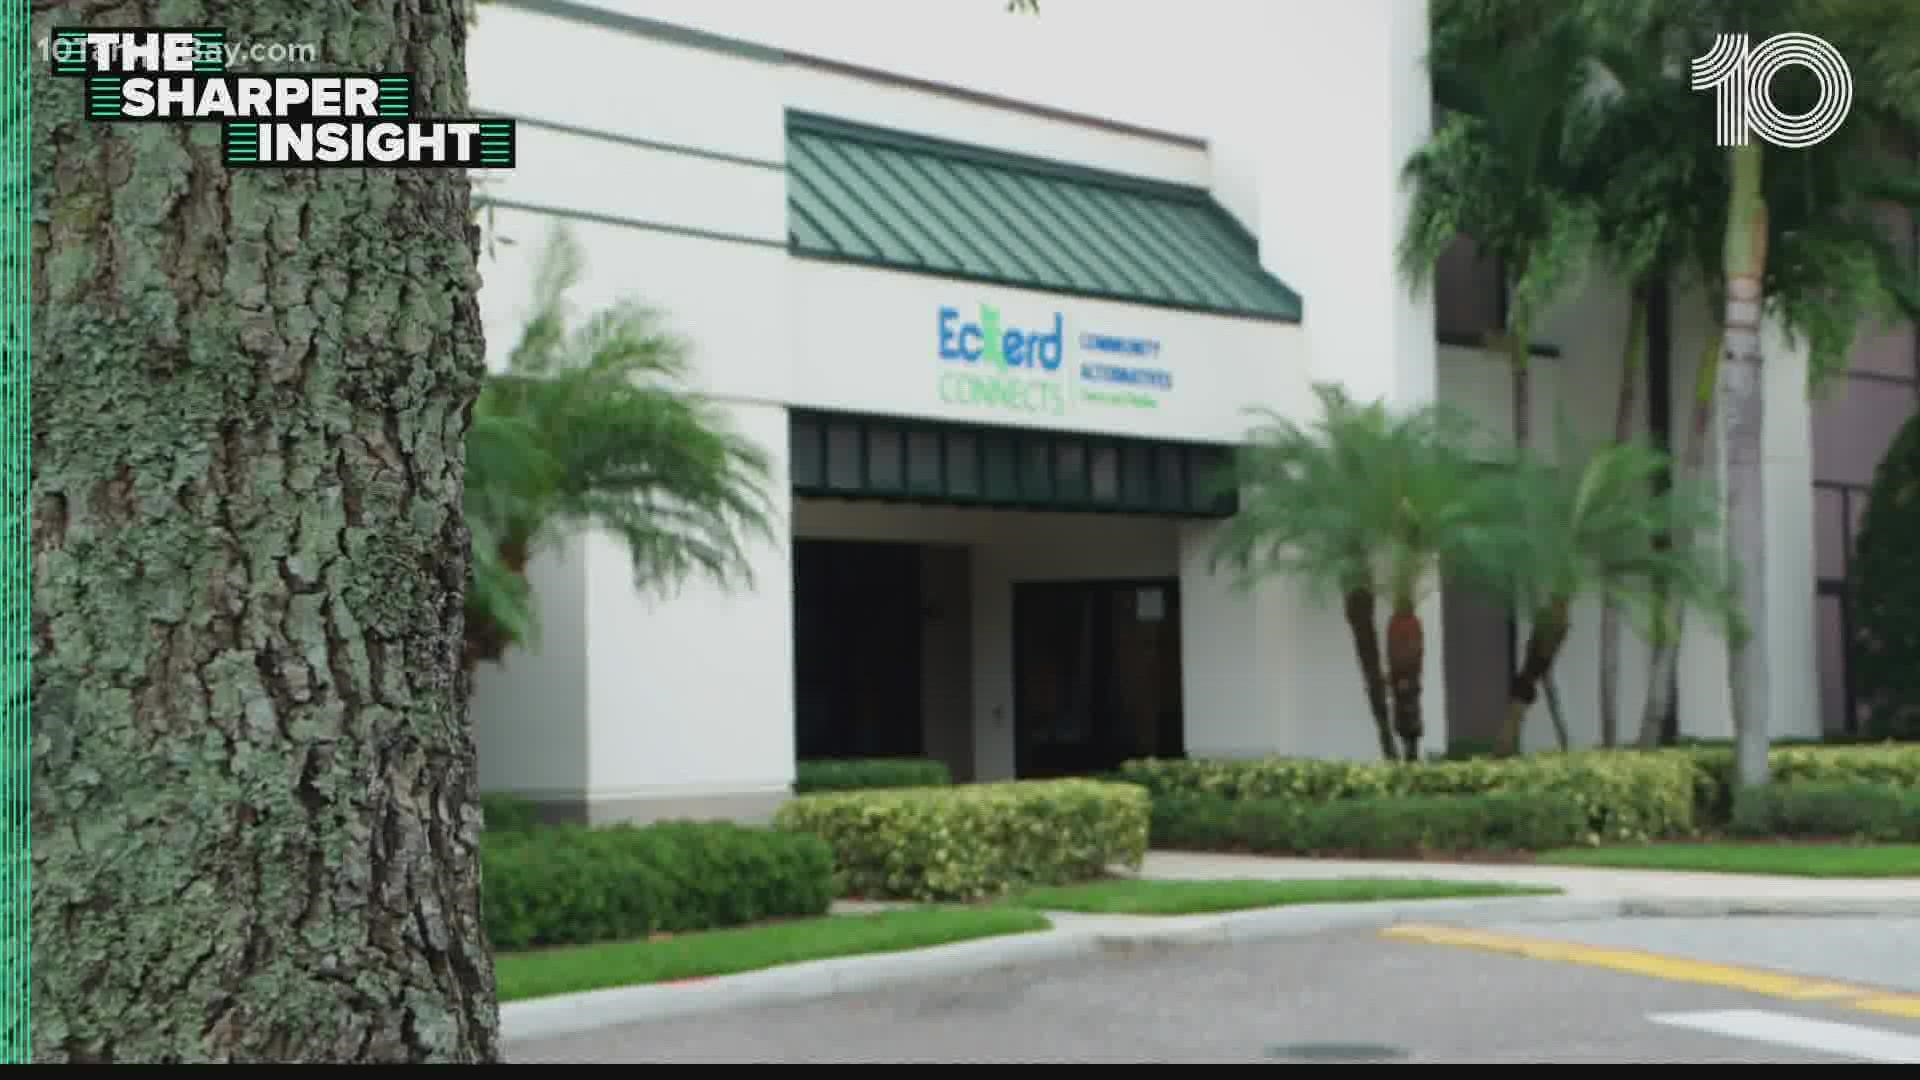 The Pinellas County Sheriff's Office is launching a criminal investigation into alleged child abuse and neglect from Eckerd.